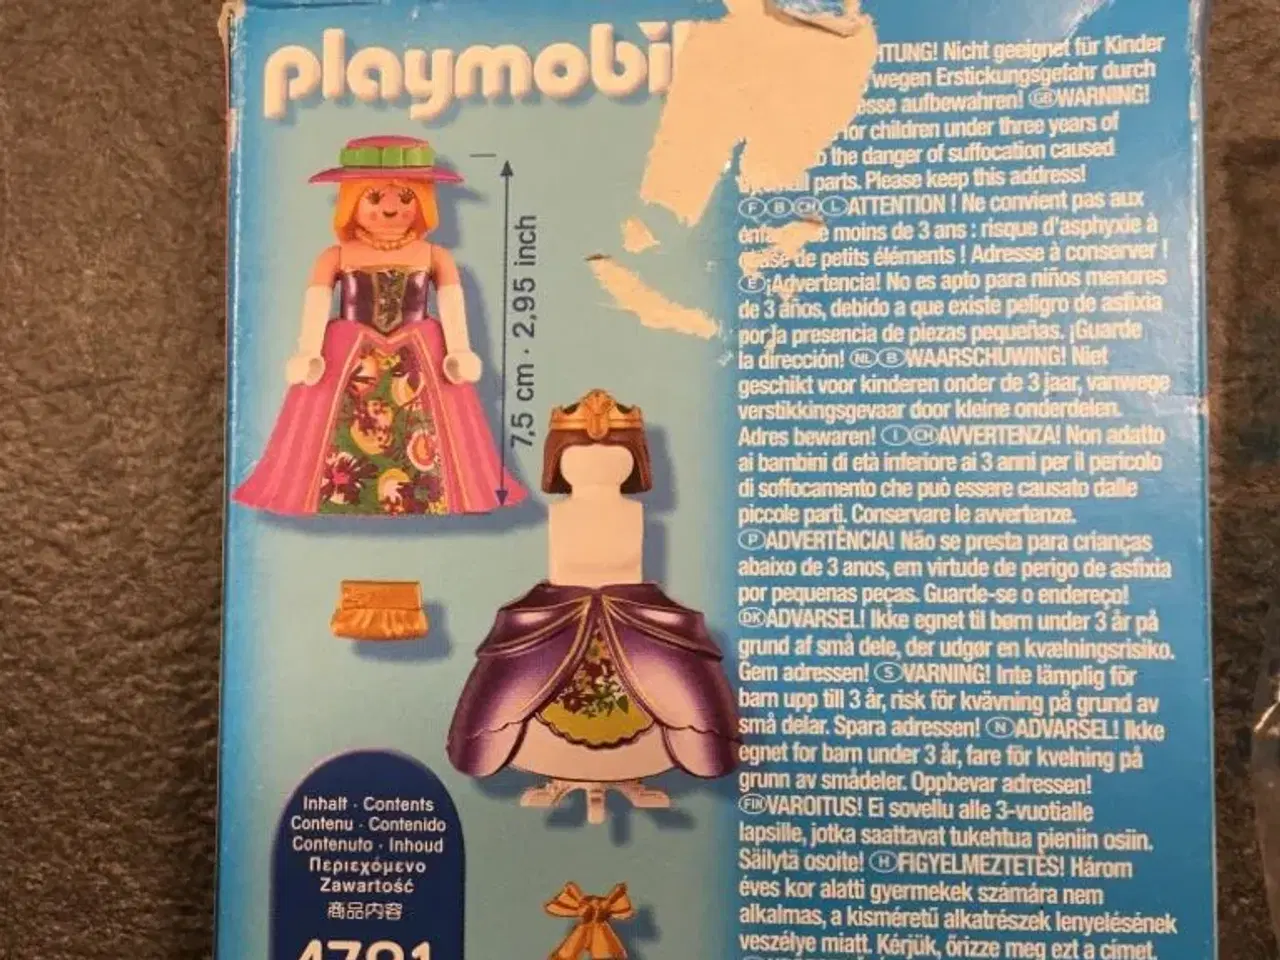 Billede 2 - Playmobil special plus/NY